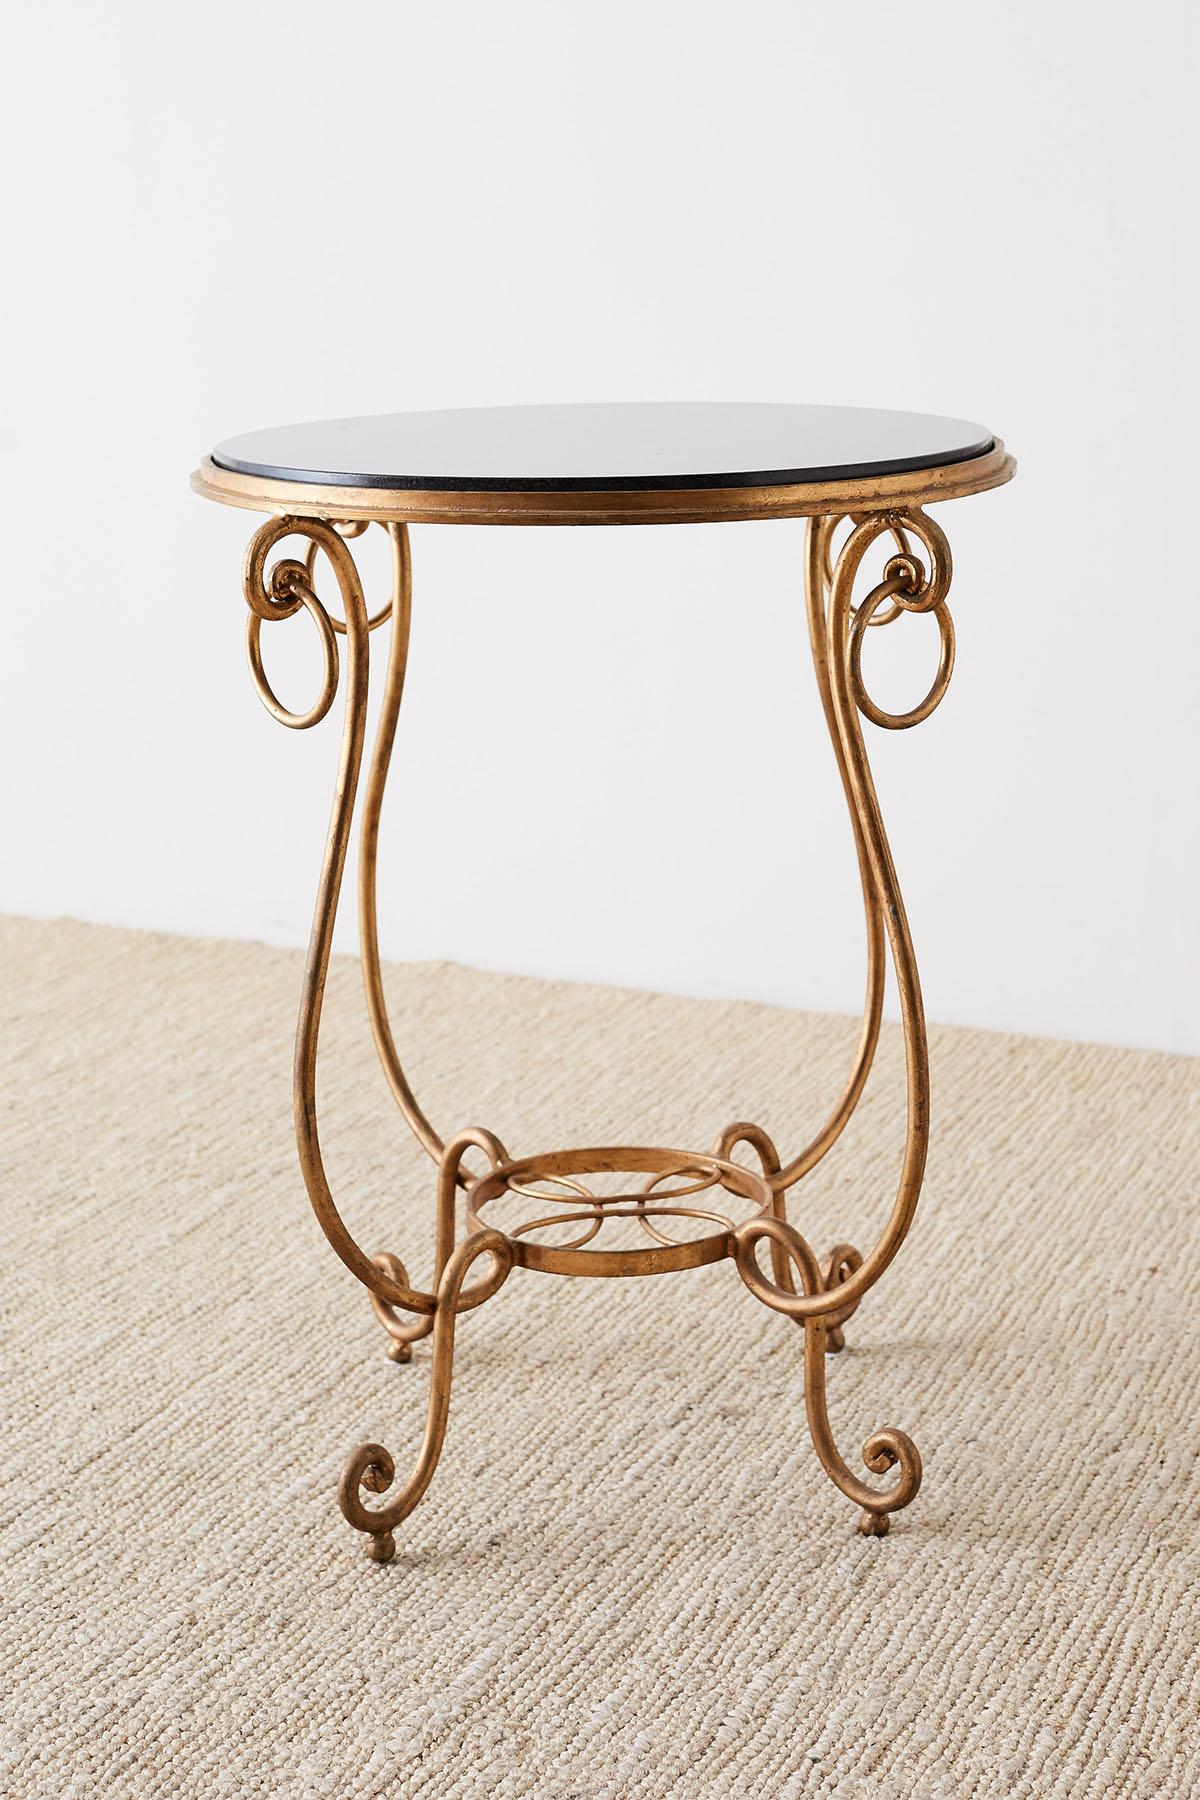 Italian Rene Drouet Style Gilded Iron and Granite Table For Sale